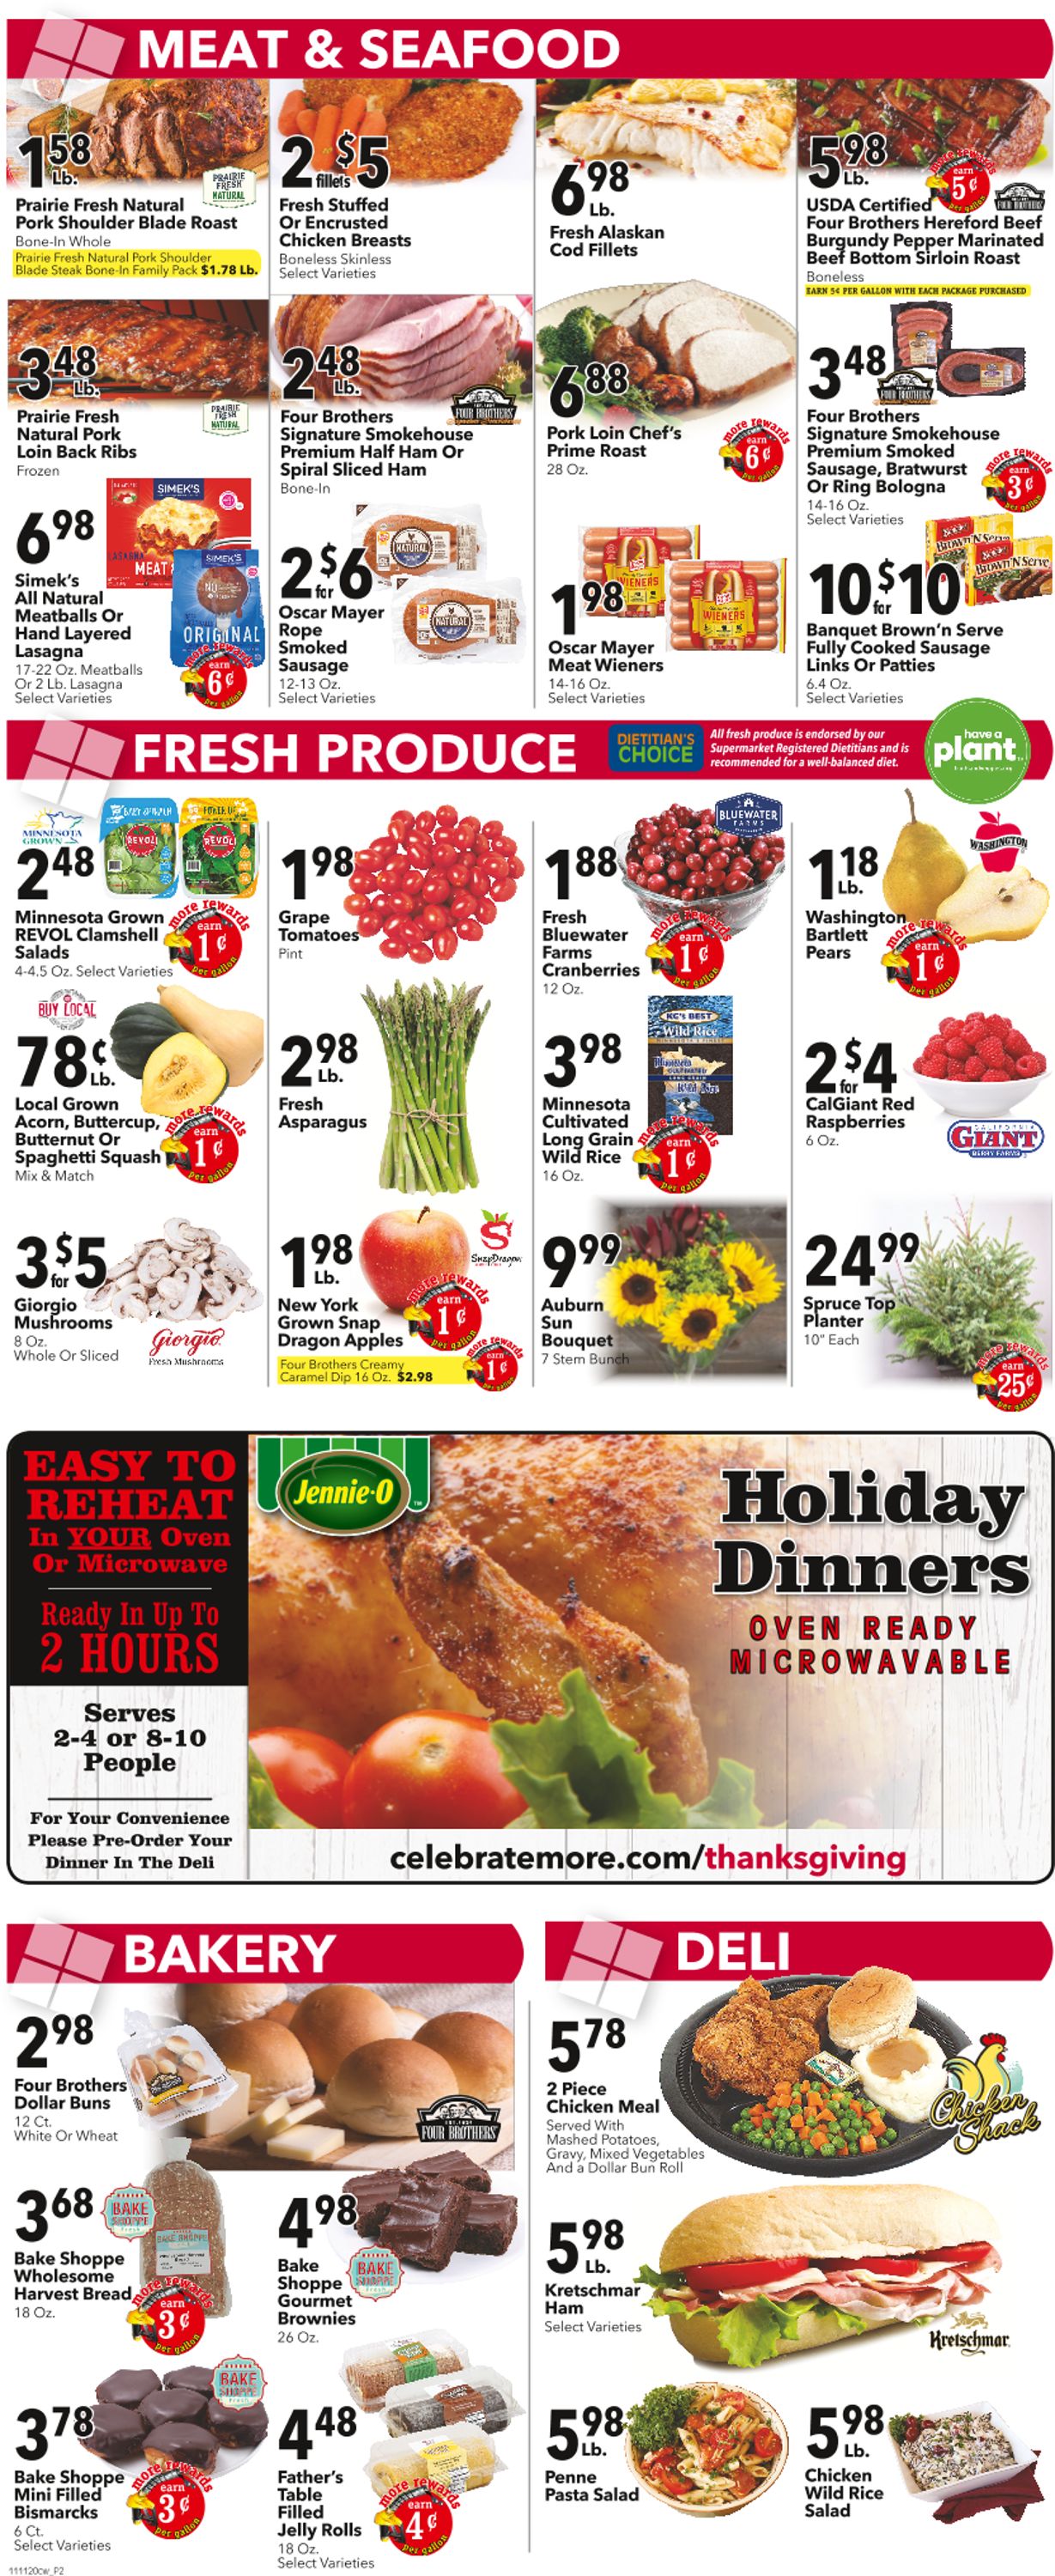 Cash Wise Weekly Ad Circular - valid 11/11-11/17/2020 (Page 2)